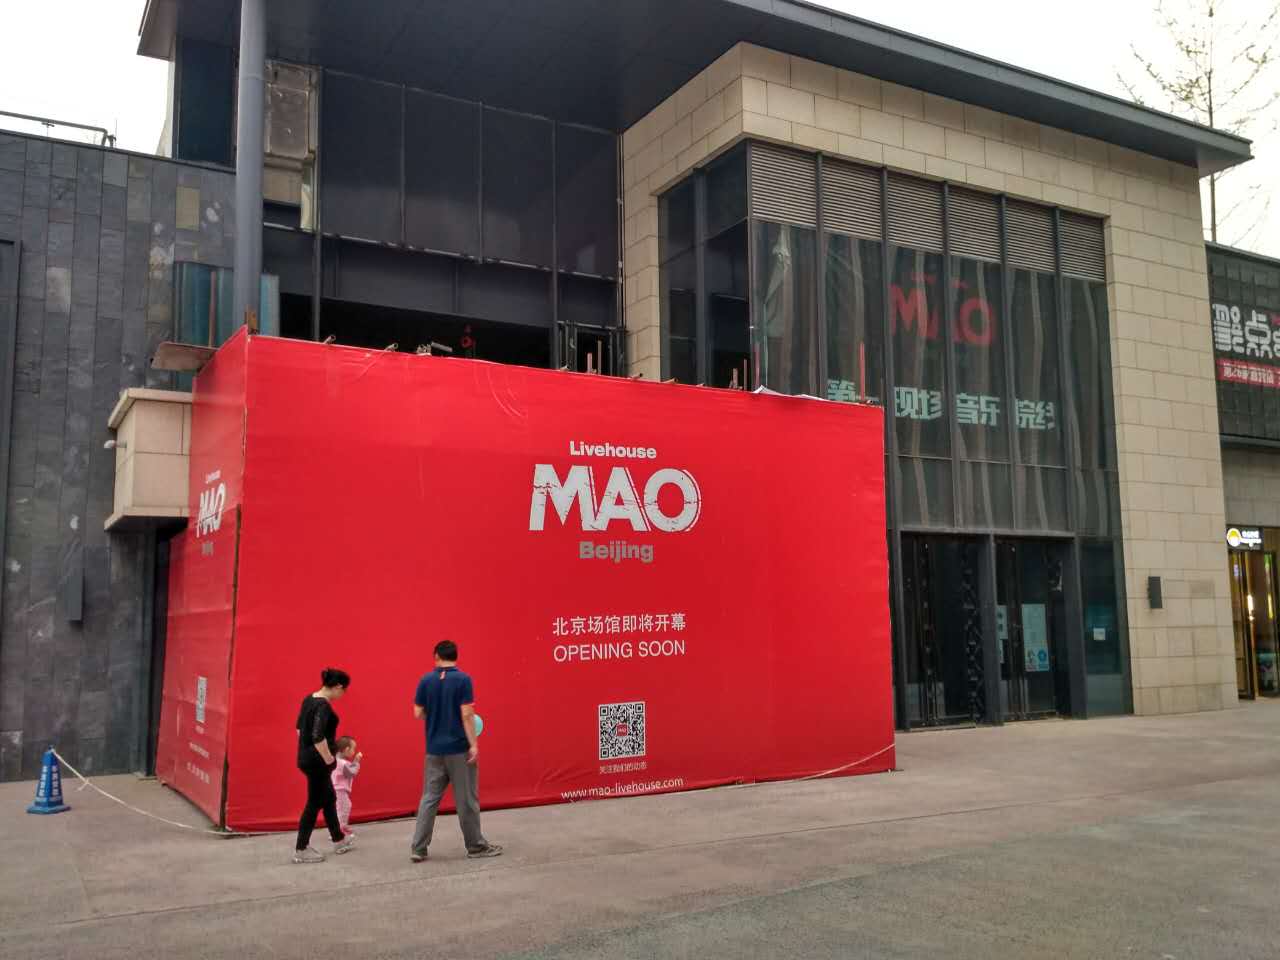 Owners of Shanghai MAO to Open New Beijing Livehouse in Wukesong in July